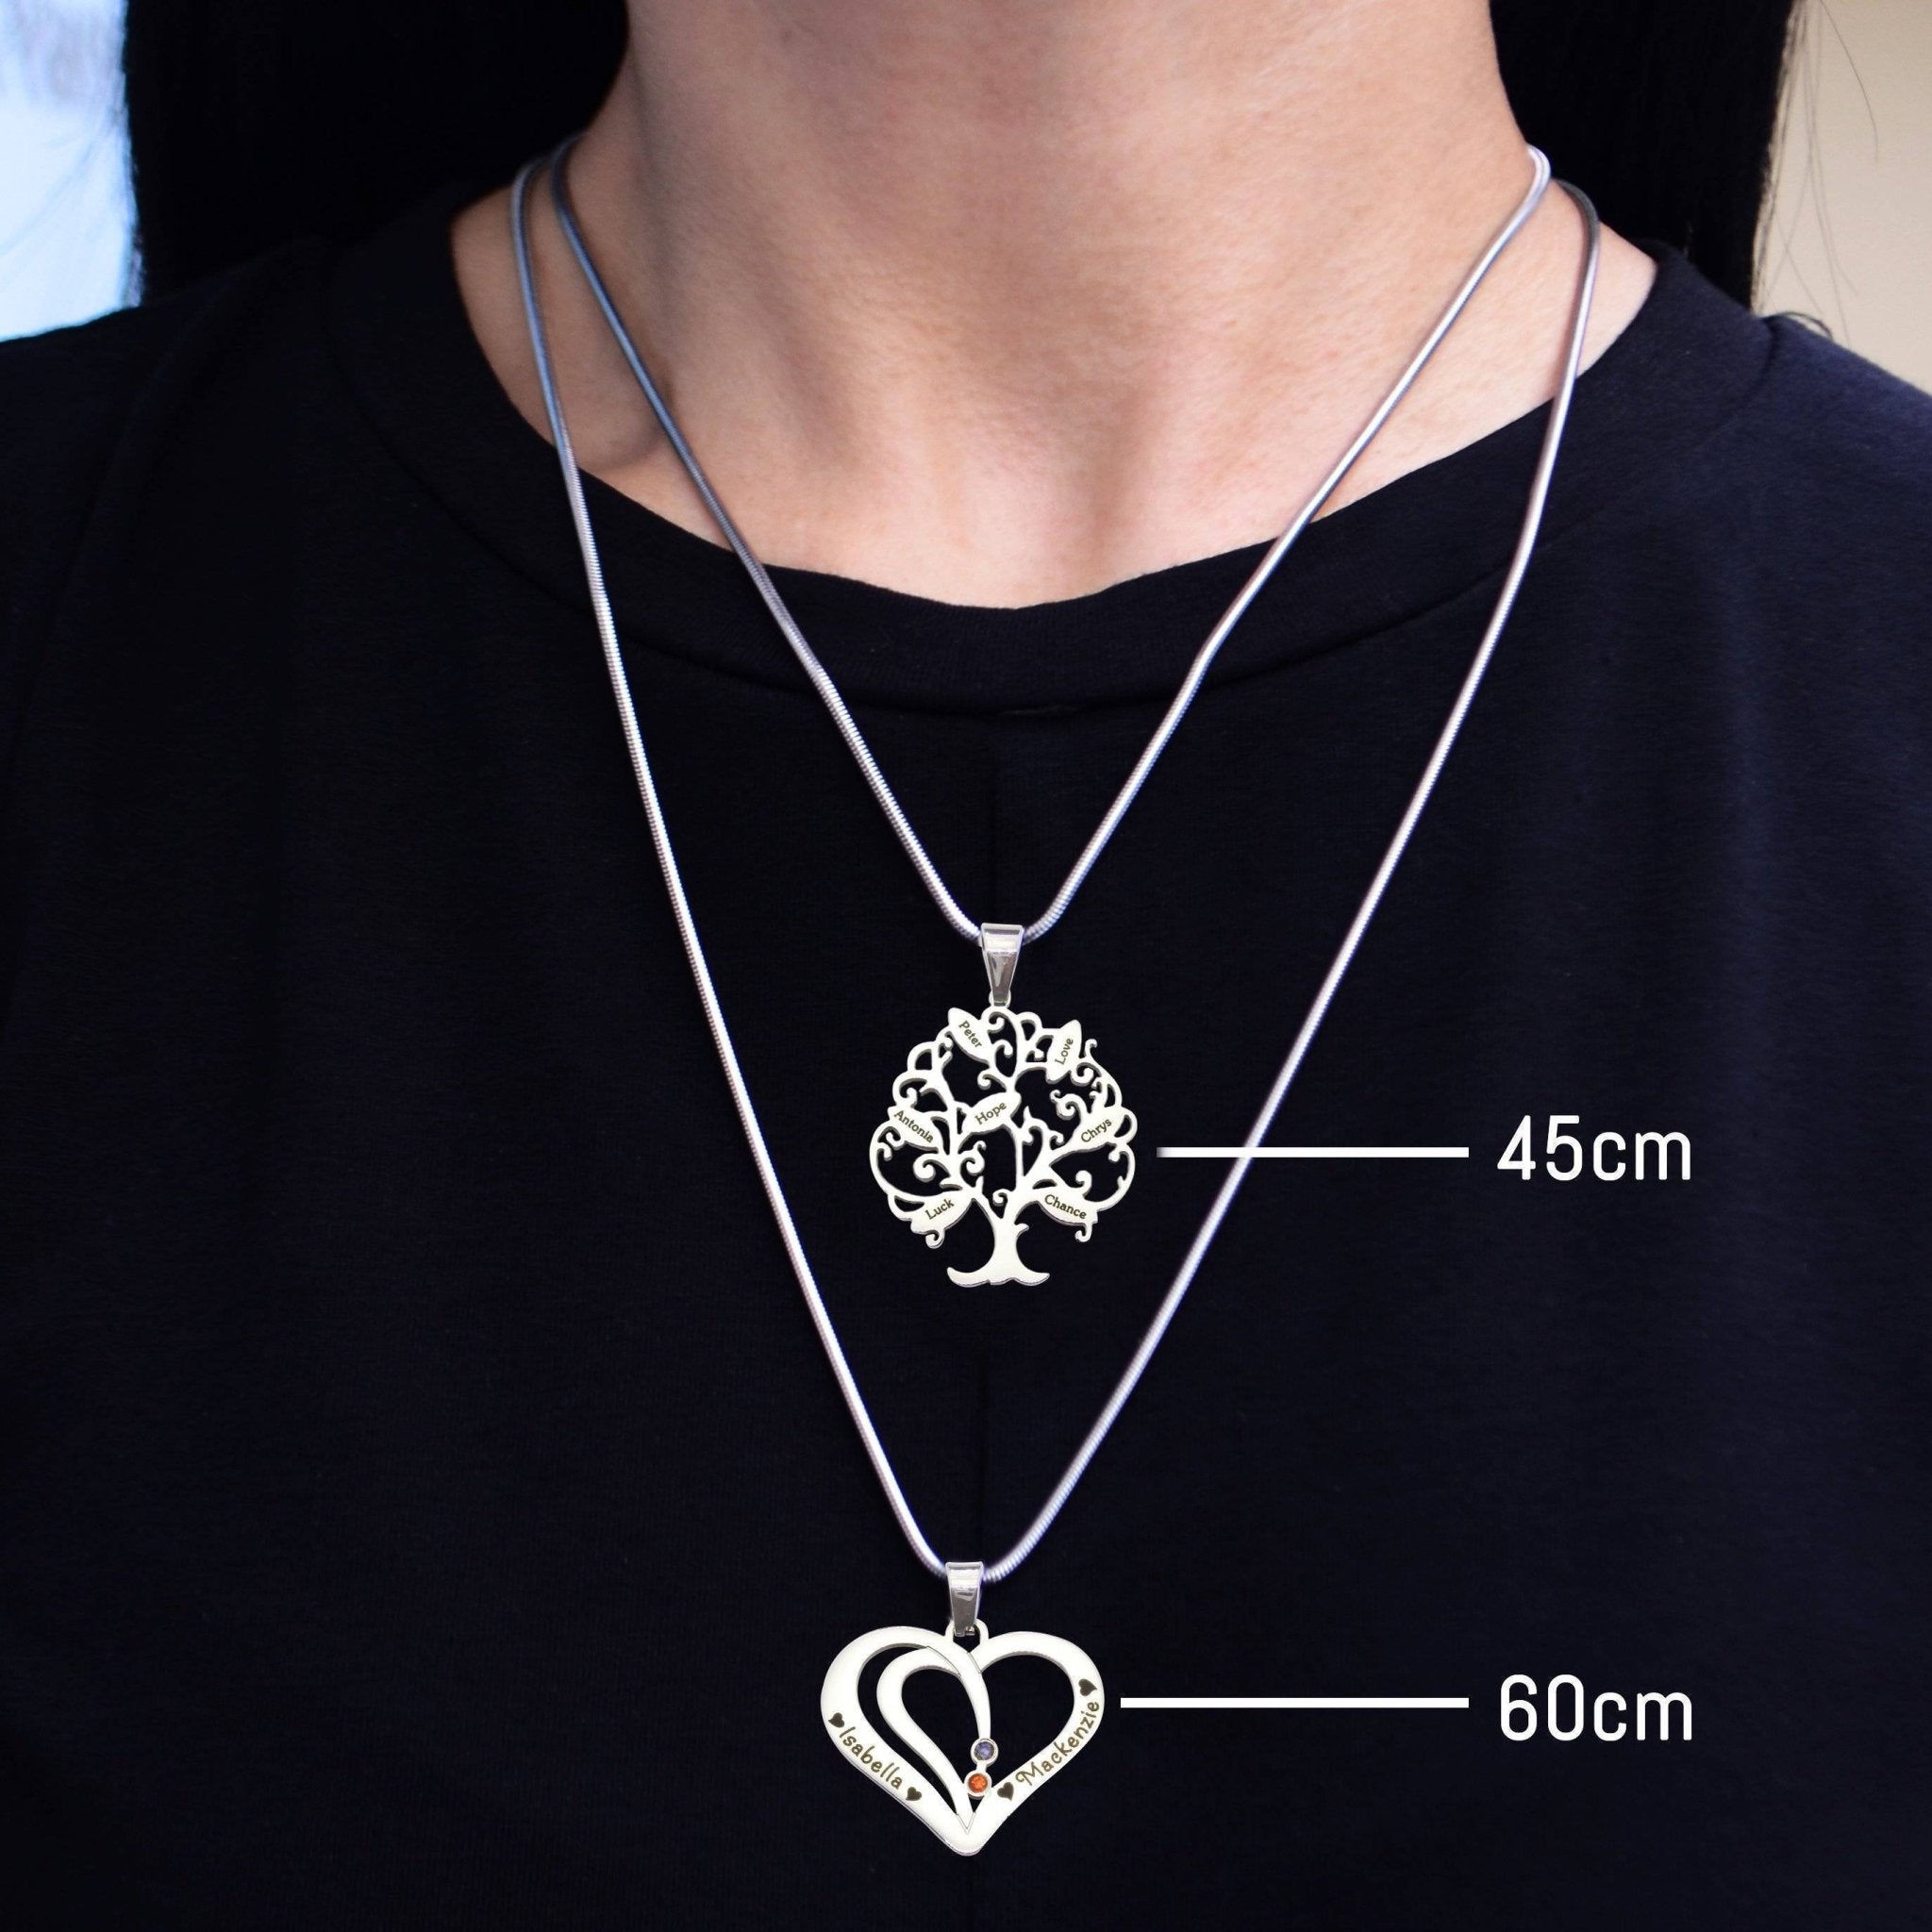 Queen of My Heart Necklace - Mothers Jewellery by Belle Fever